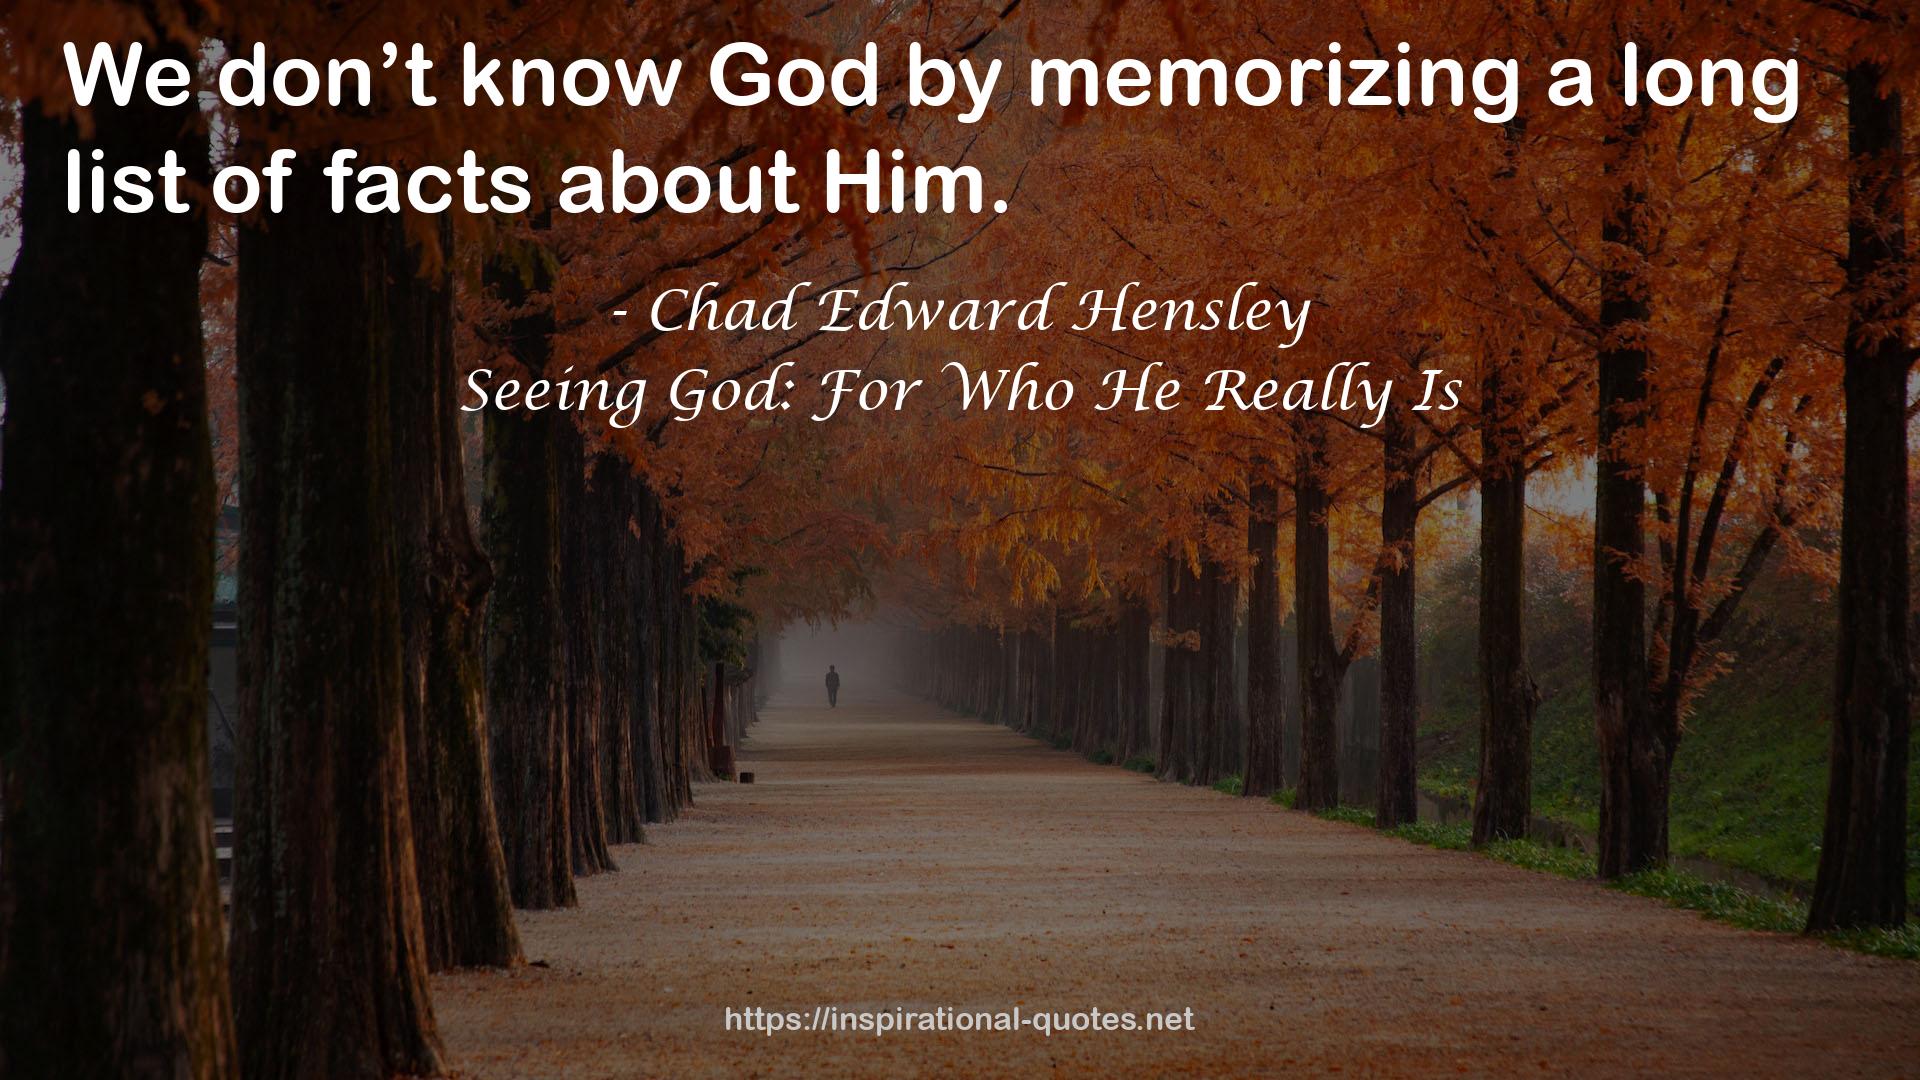 Seeing God: For Who He Really Is QUOTES